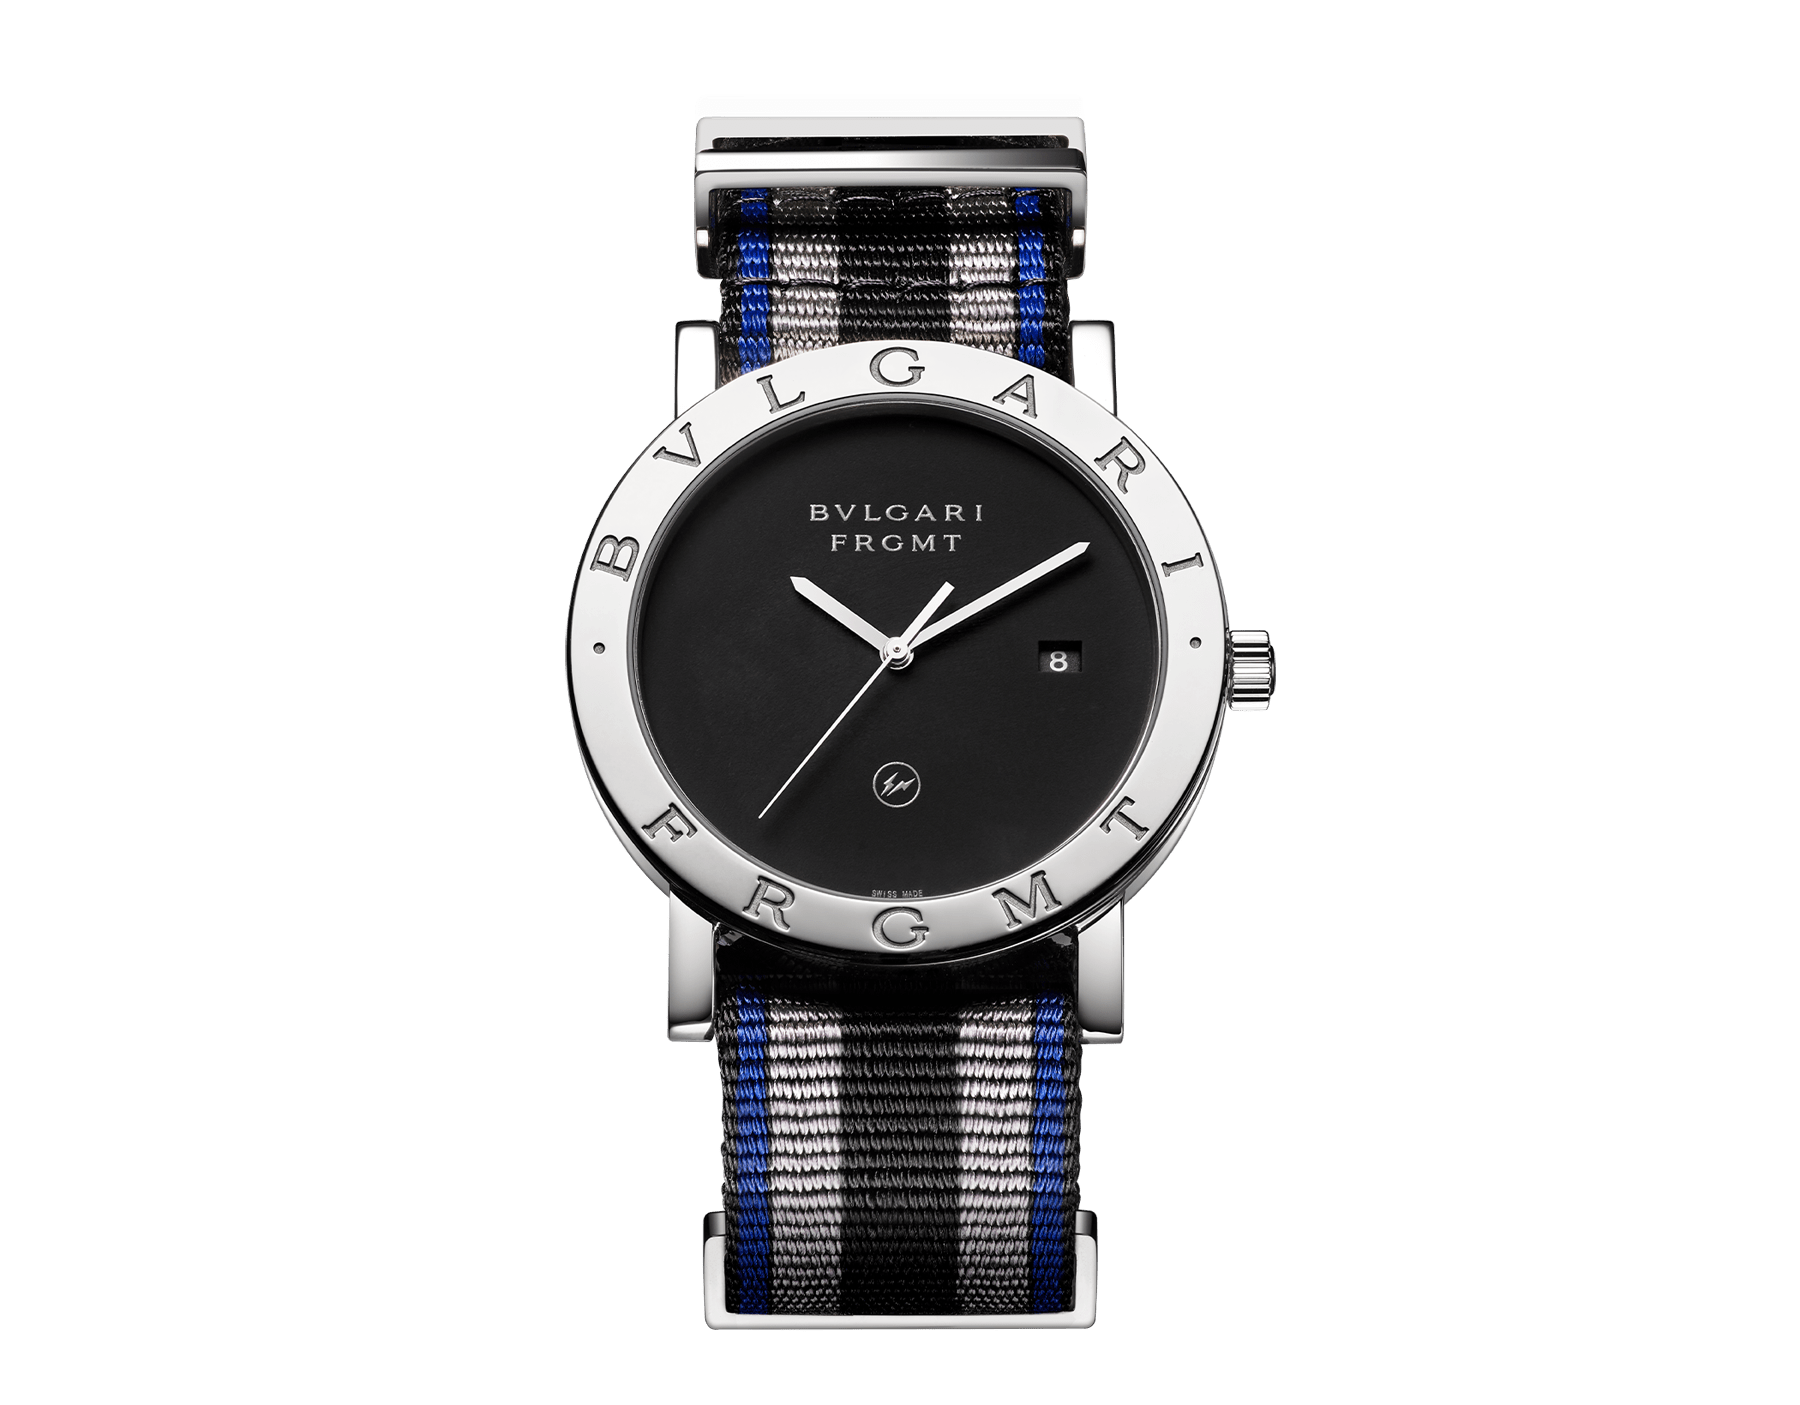 BVLGARI BVLGARI Fragment Design watch with manufacture mechanical movement, automatic winding, stainless steel case, bezel engraved with the special BVLGARI FRGMT logo, black dial and black nylon bracelet. Water-resistant up to 50 meters. 103570 image 1